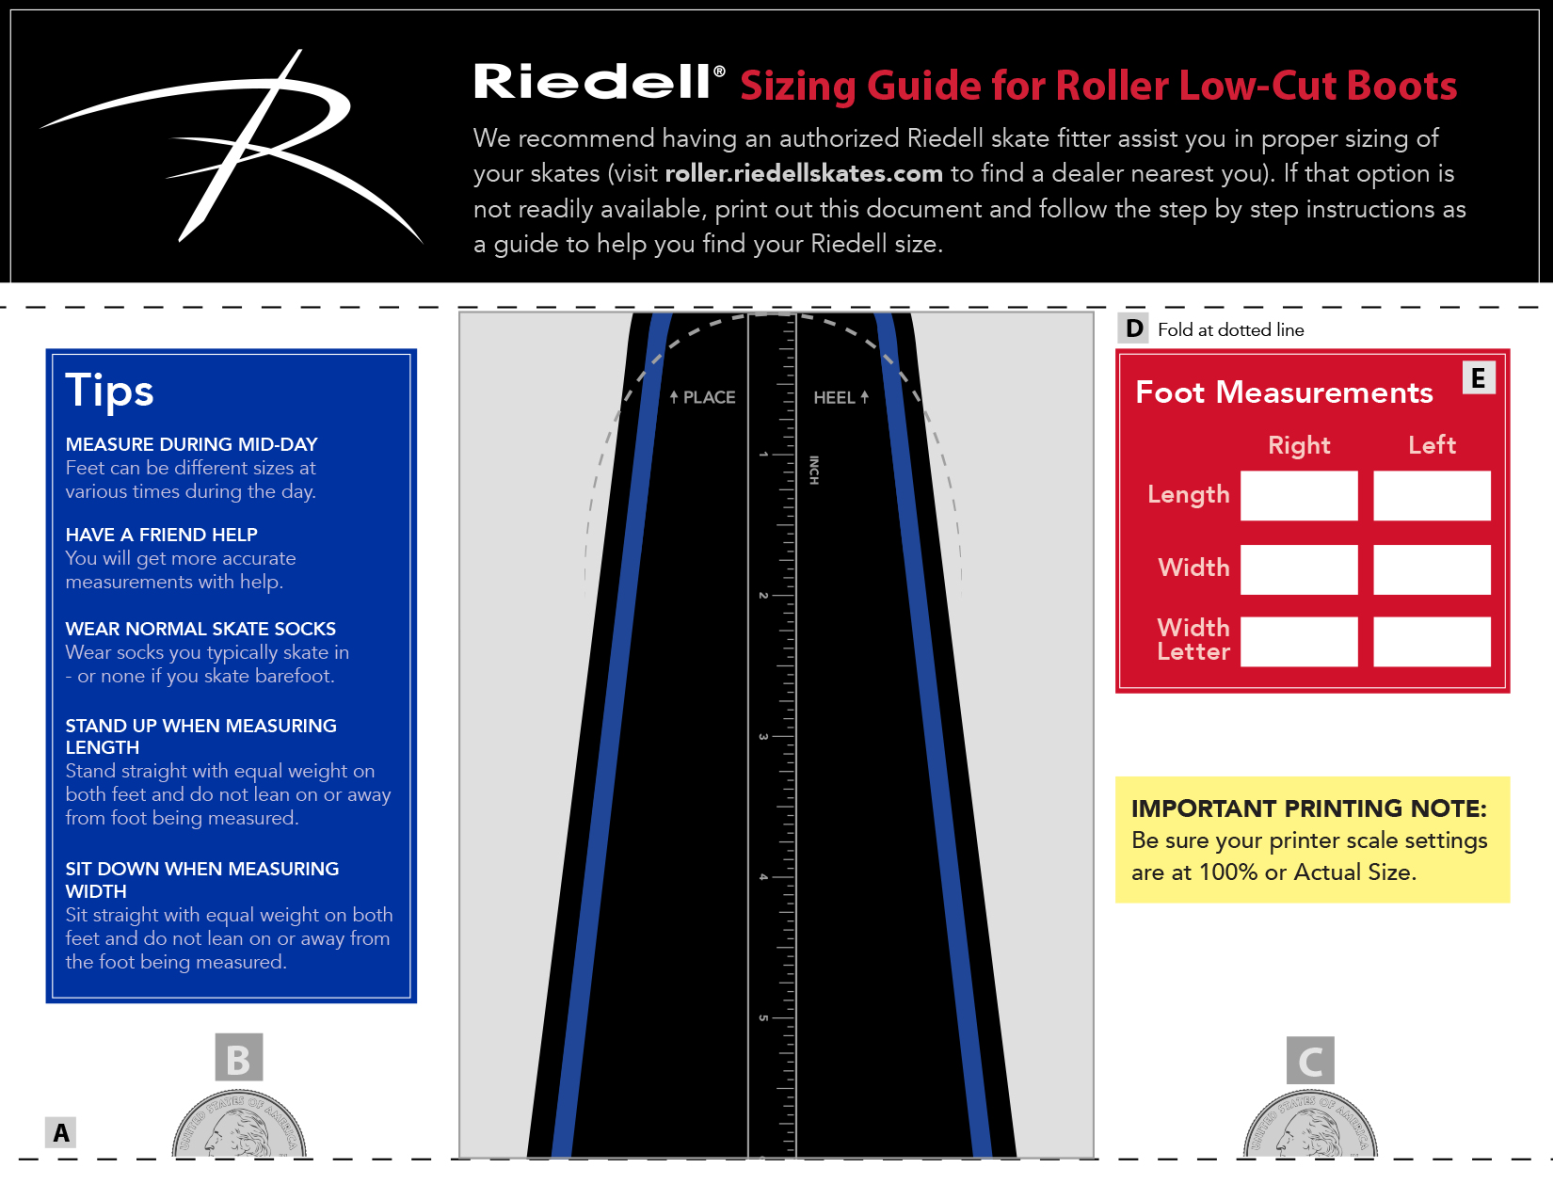 Riedell Roller Sizing Guide Low Cut Boots ImageButton